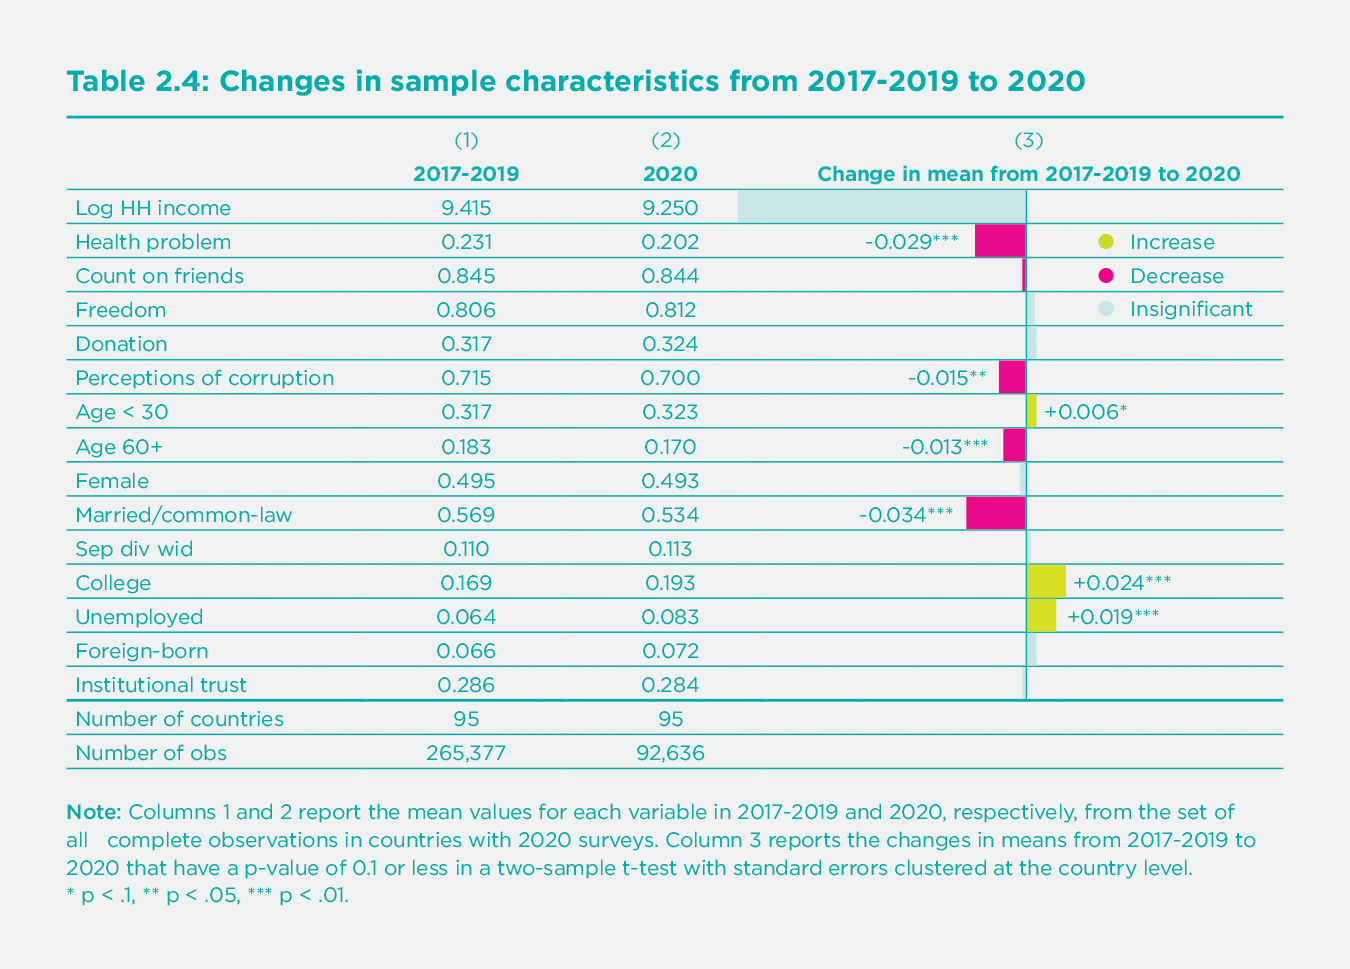 Table 2.4 Changes from 2017-2019 to 2020 in mean values of key influences